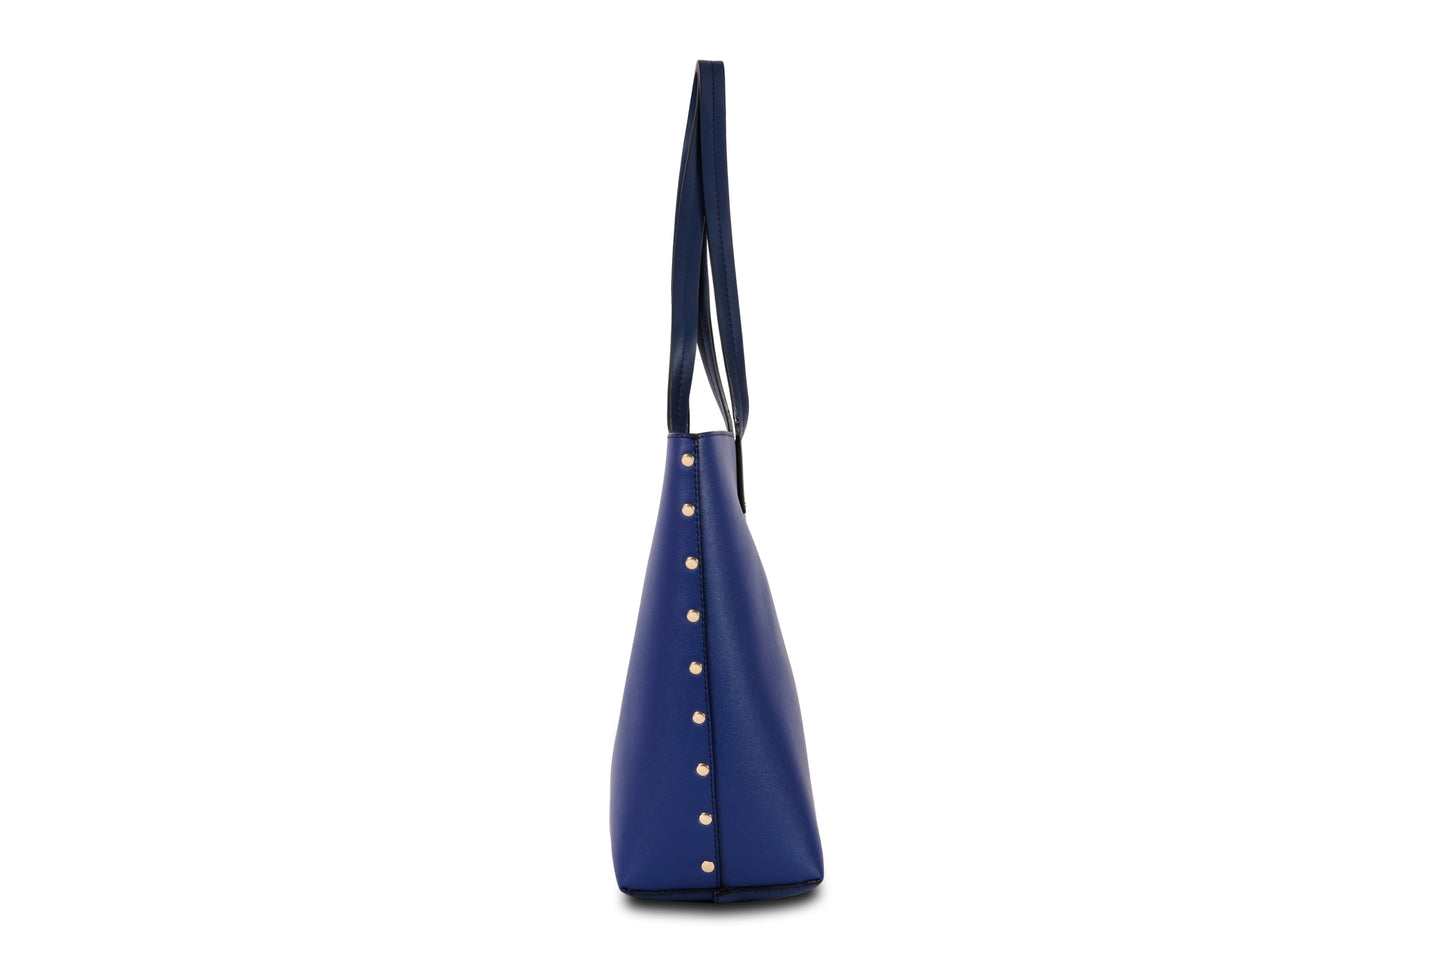 Rowi Pebble Grain Faux Leather Twilight Blue Tote Bag Handbag made by Dewi Maya side view available at the best boutique in Upstate South Carolina Spartanburg Greenville Dewi Maya Boutique